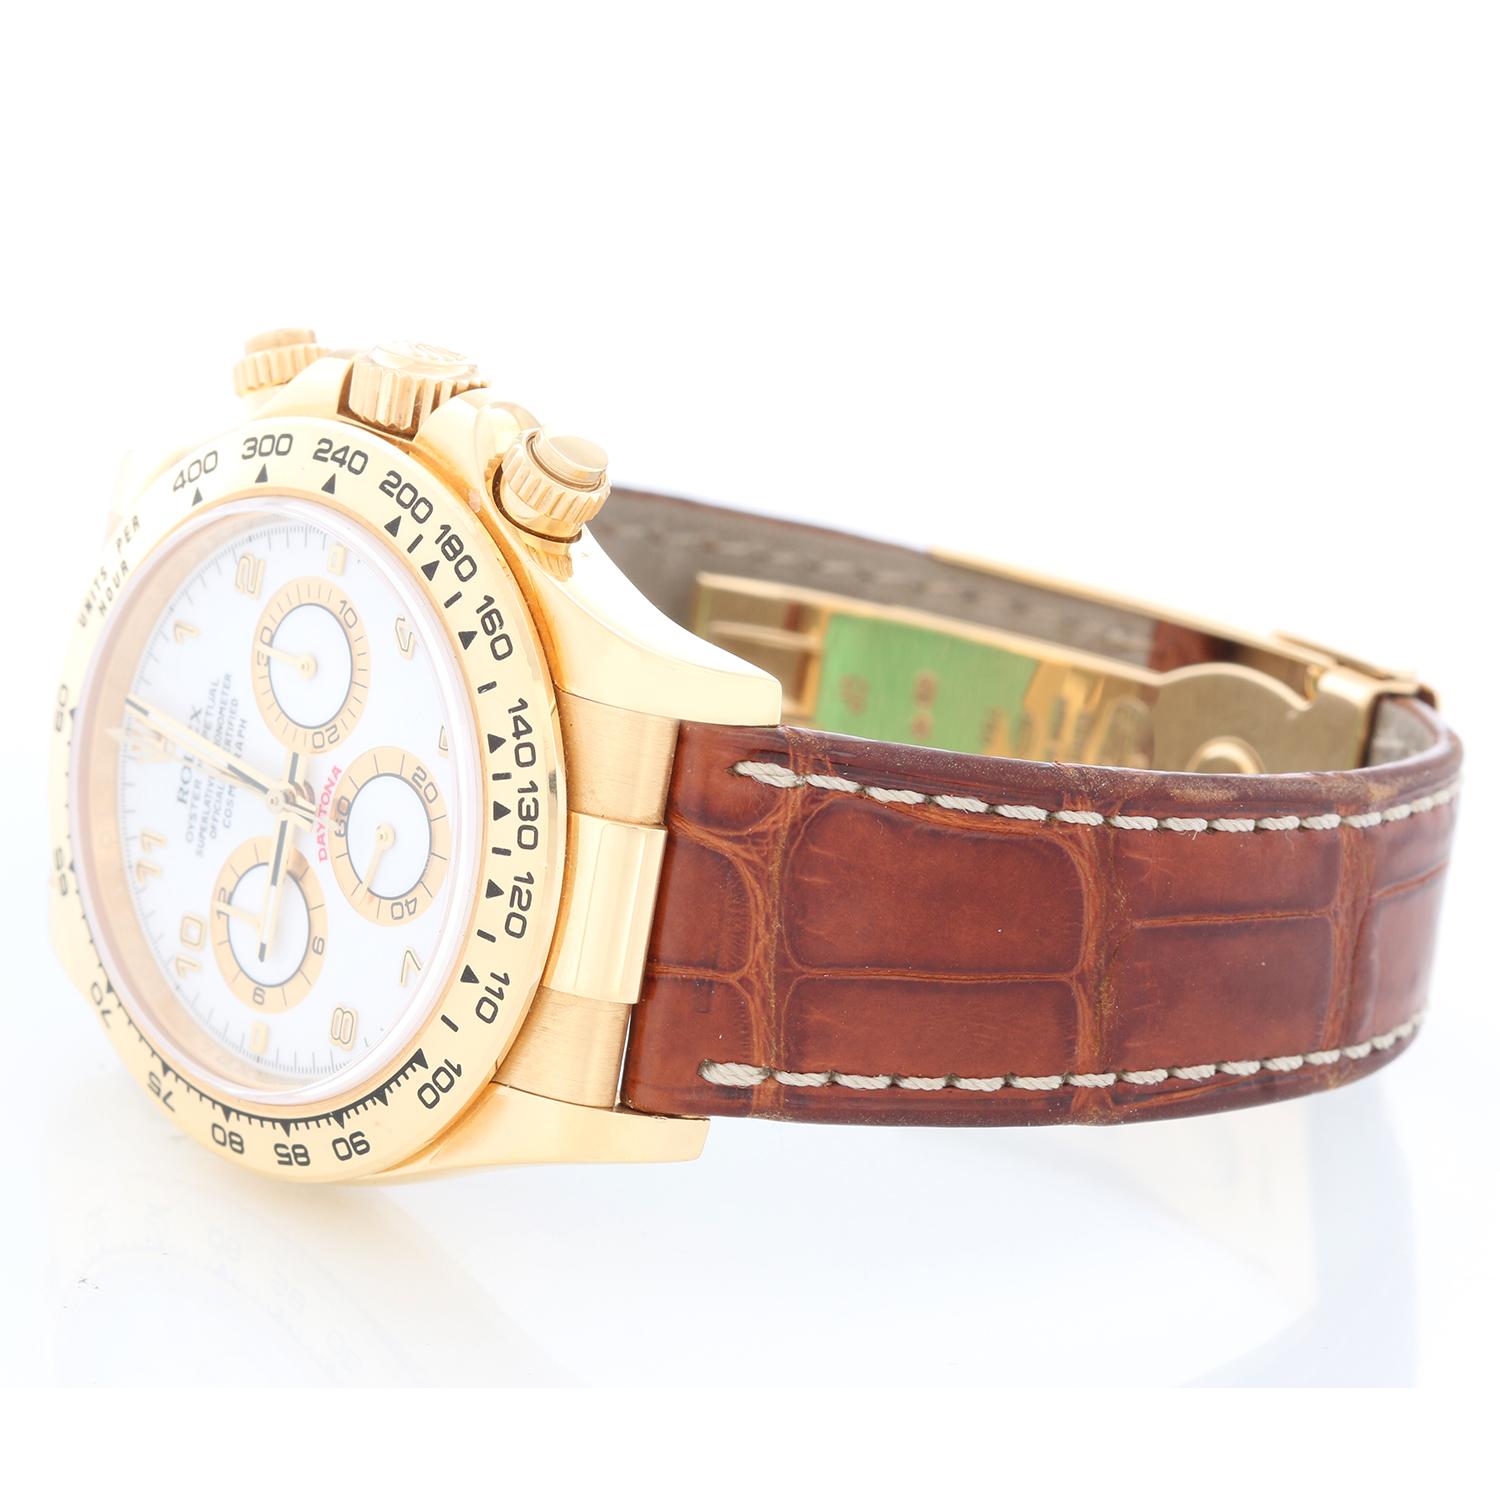 Rolex Cosmograph Daytona Men's 18k Yellow Gold Watch 116518 - Automatic winding, chronograph, 44 jewels, sapphire crystal. 18k yellow gold case and bezel. Has never been polished. In its original condition. White dial with gold Arabic numerals.